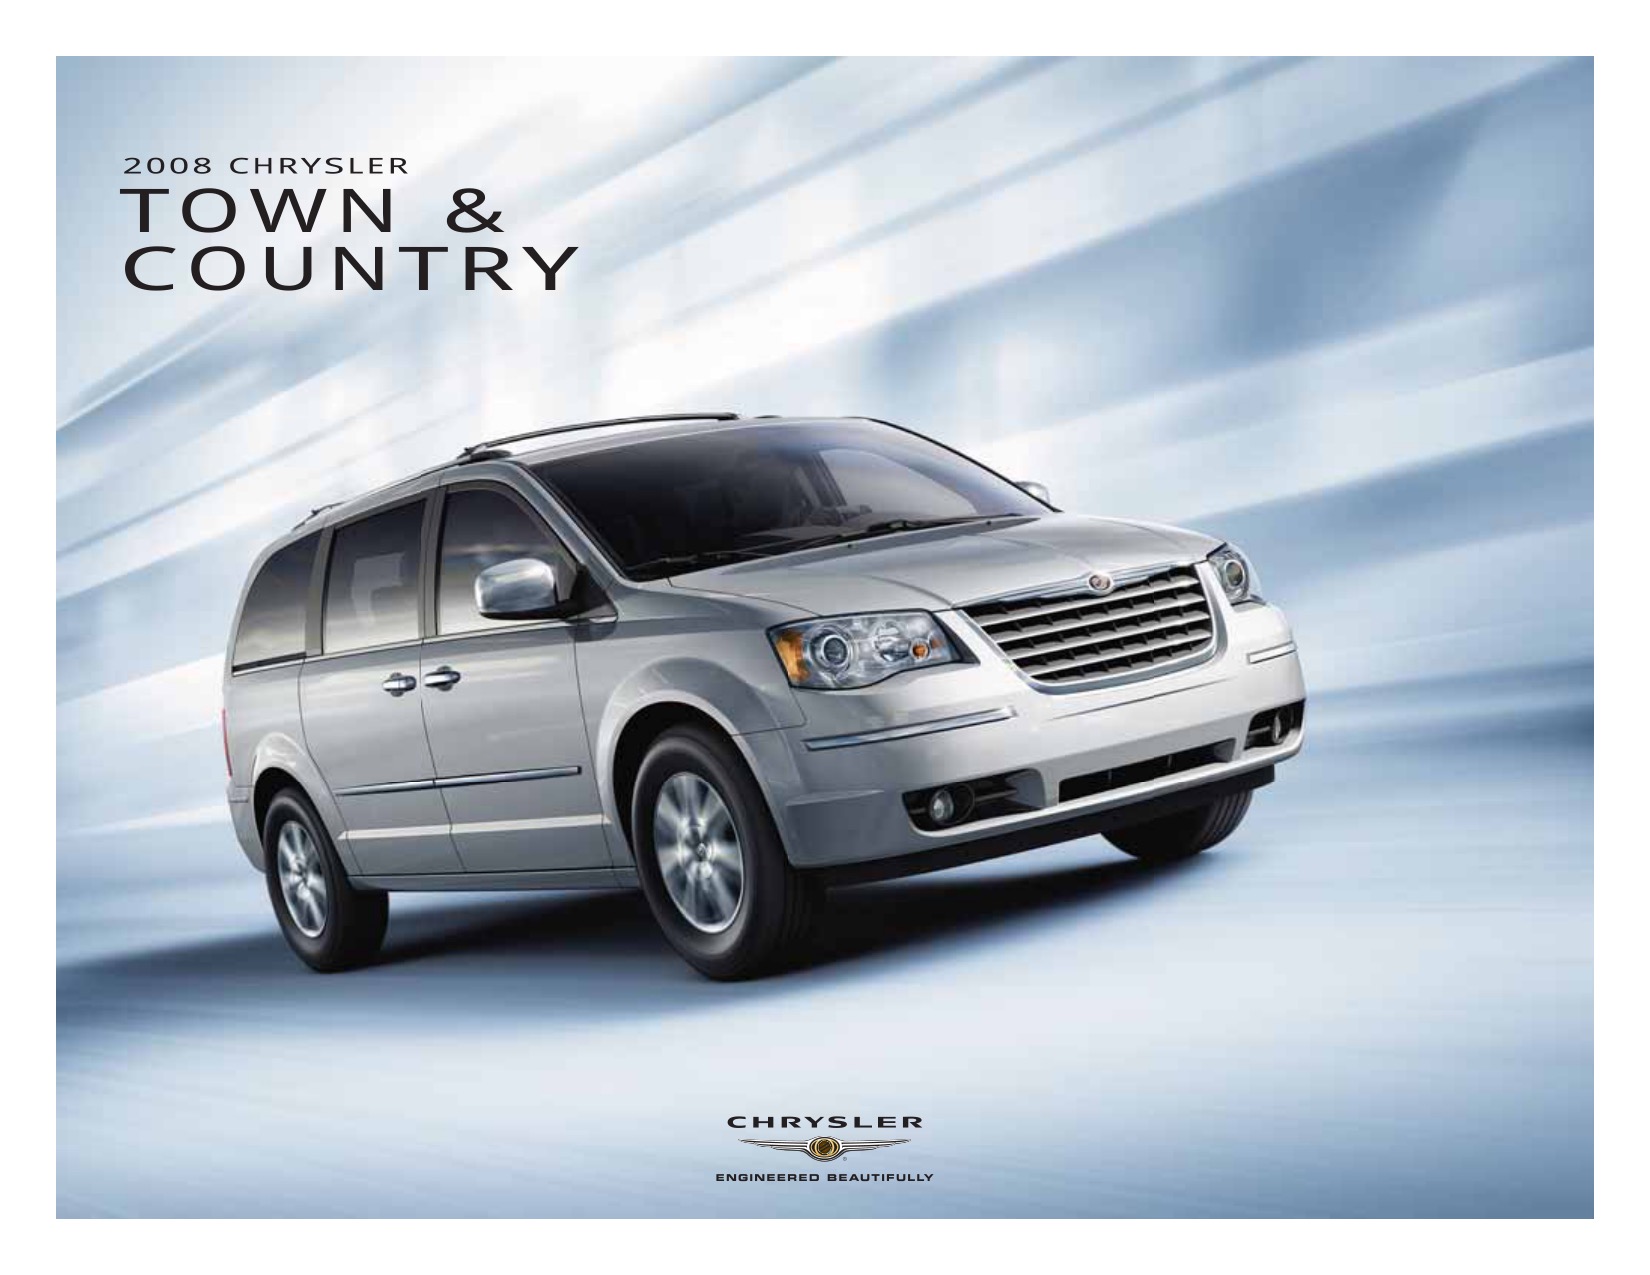 2008 Chrysler Town & Country Brochure